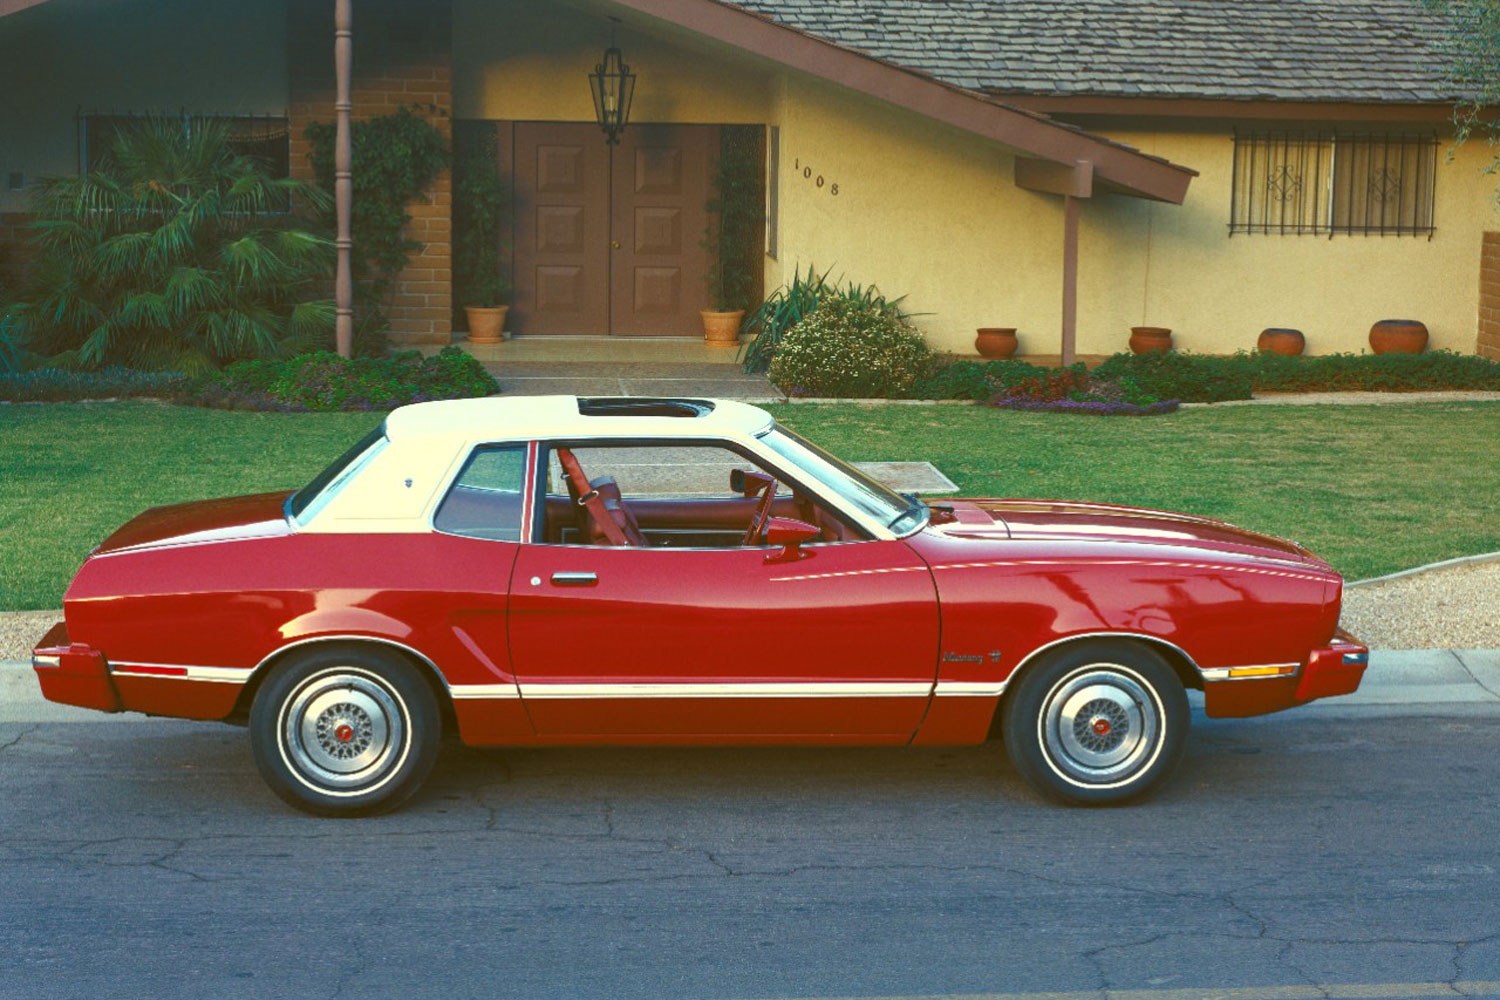 1974 Ford Mustang II in red with a white landau roof parked in front of a house